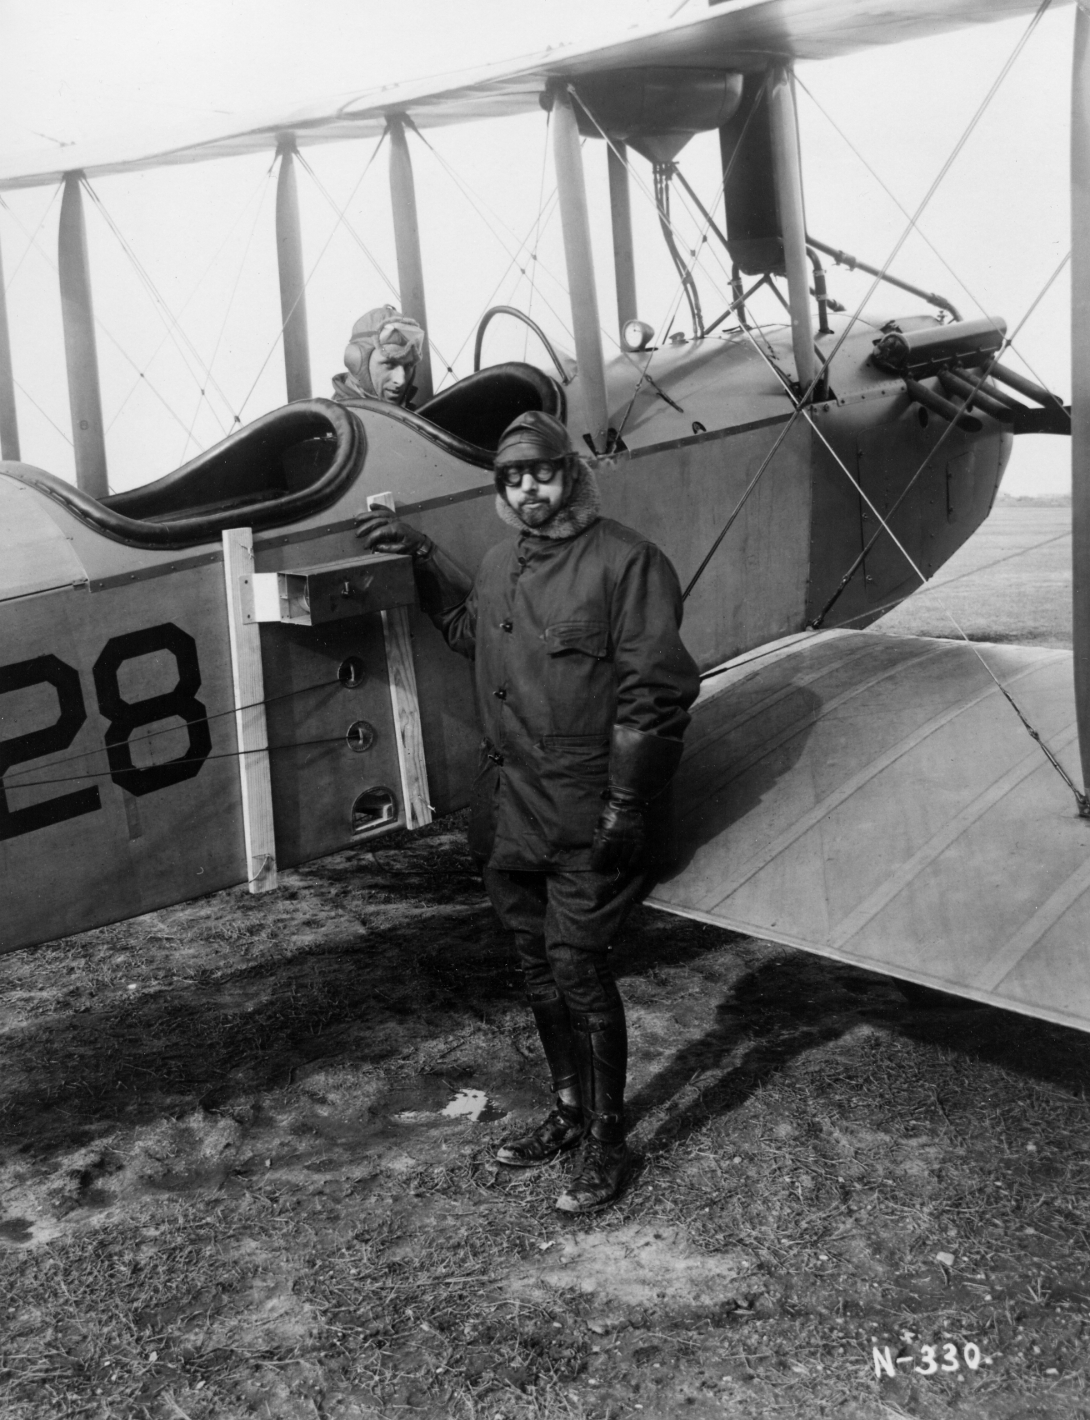 a man wearing thick glasses,flying cap and jacket, along with long gloves and boots, stands next to a camera attached to the side of a two-seater biplane. in the front seat of the plane sits a pilot with aviator cap and goggles